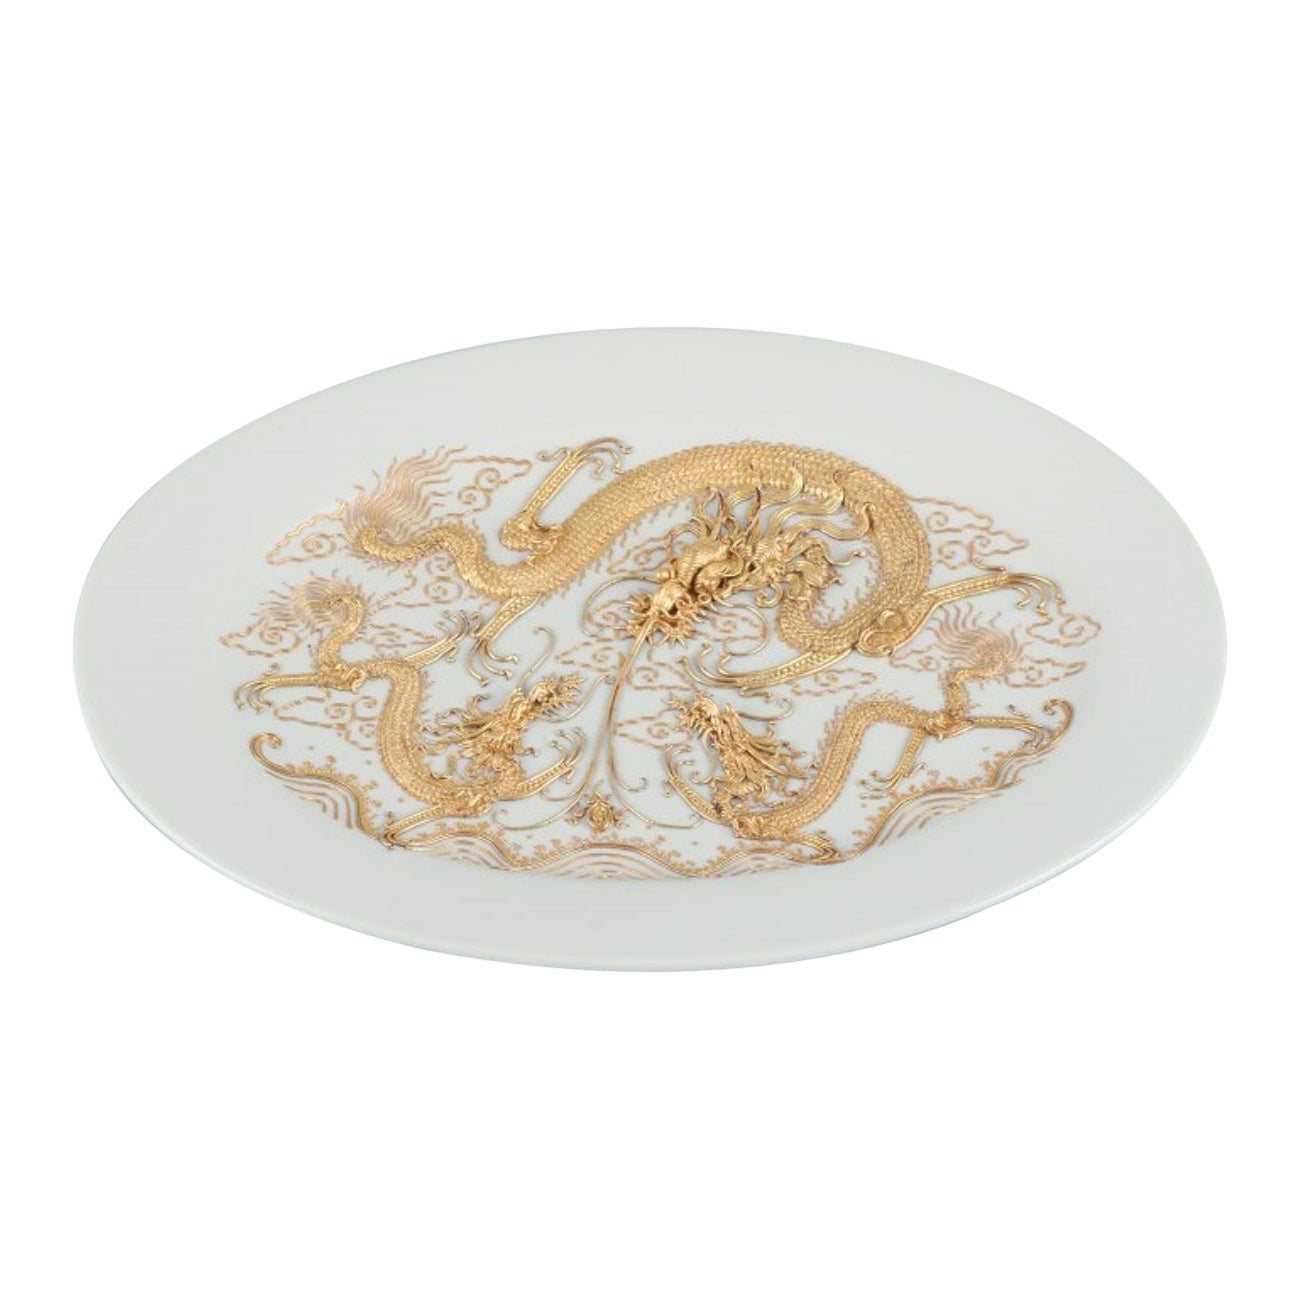 Large oval porcelain platter featuring dragons, in Versace style. For Sale